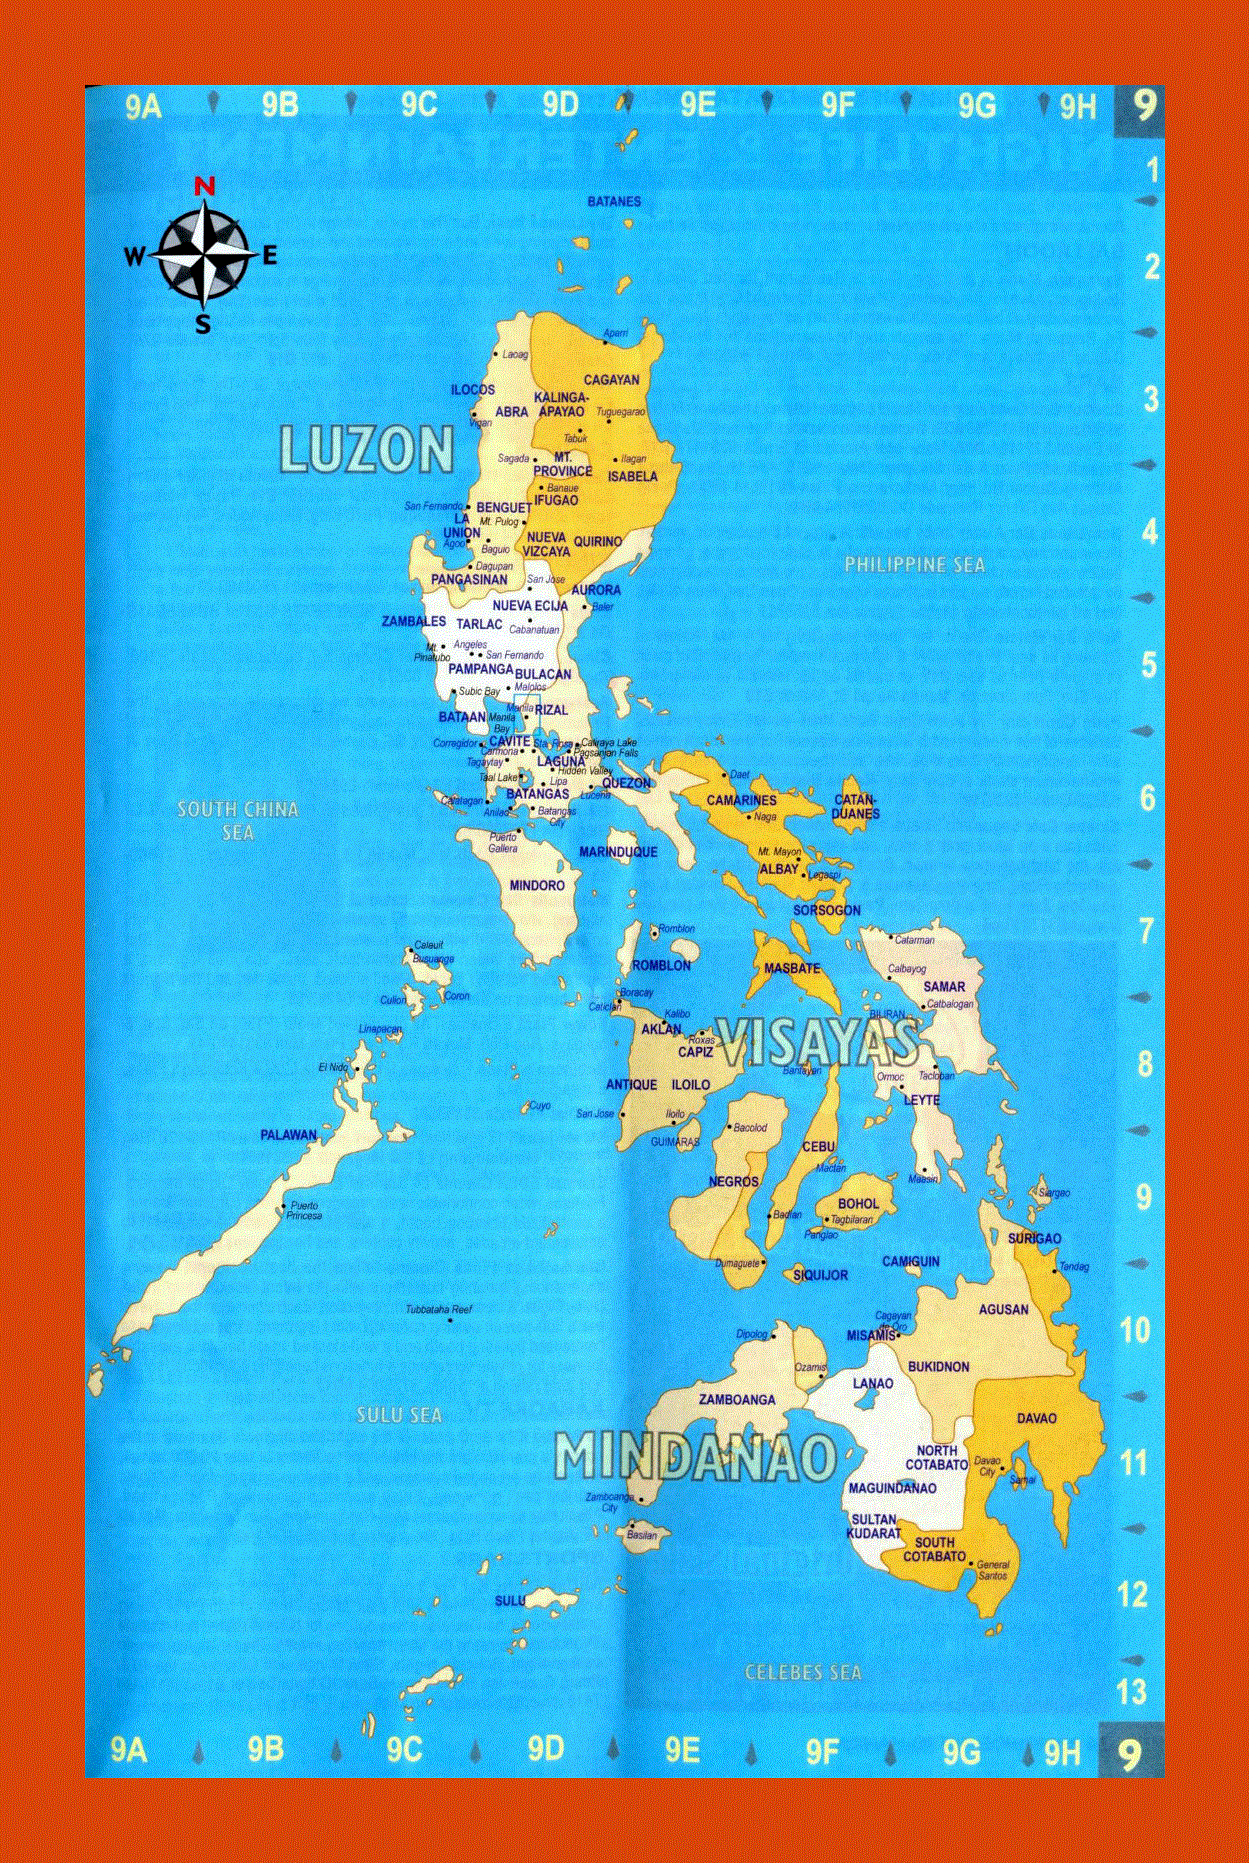 Administrative map of Philippines